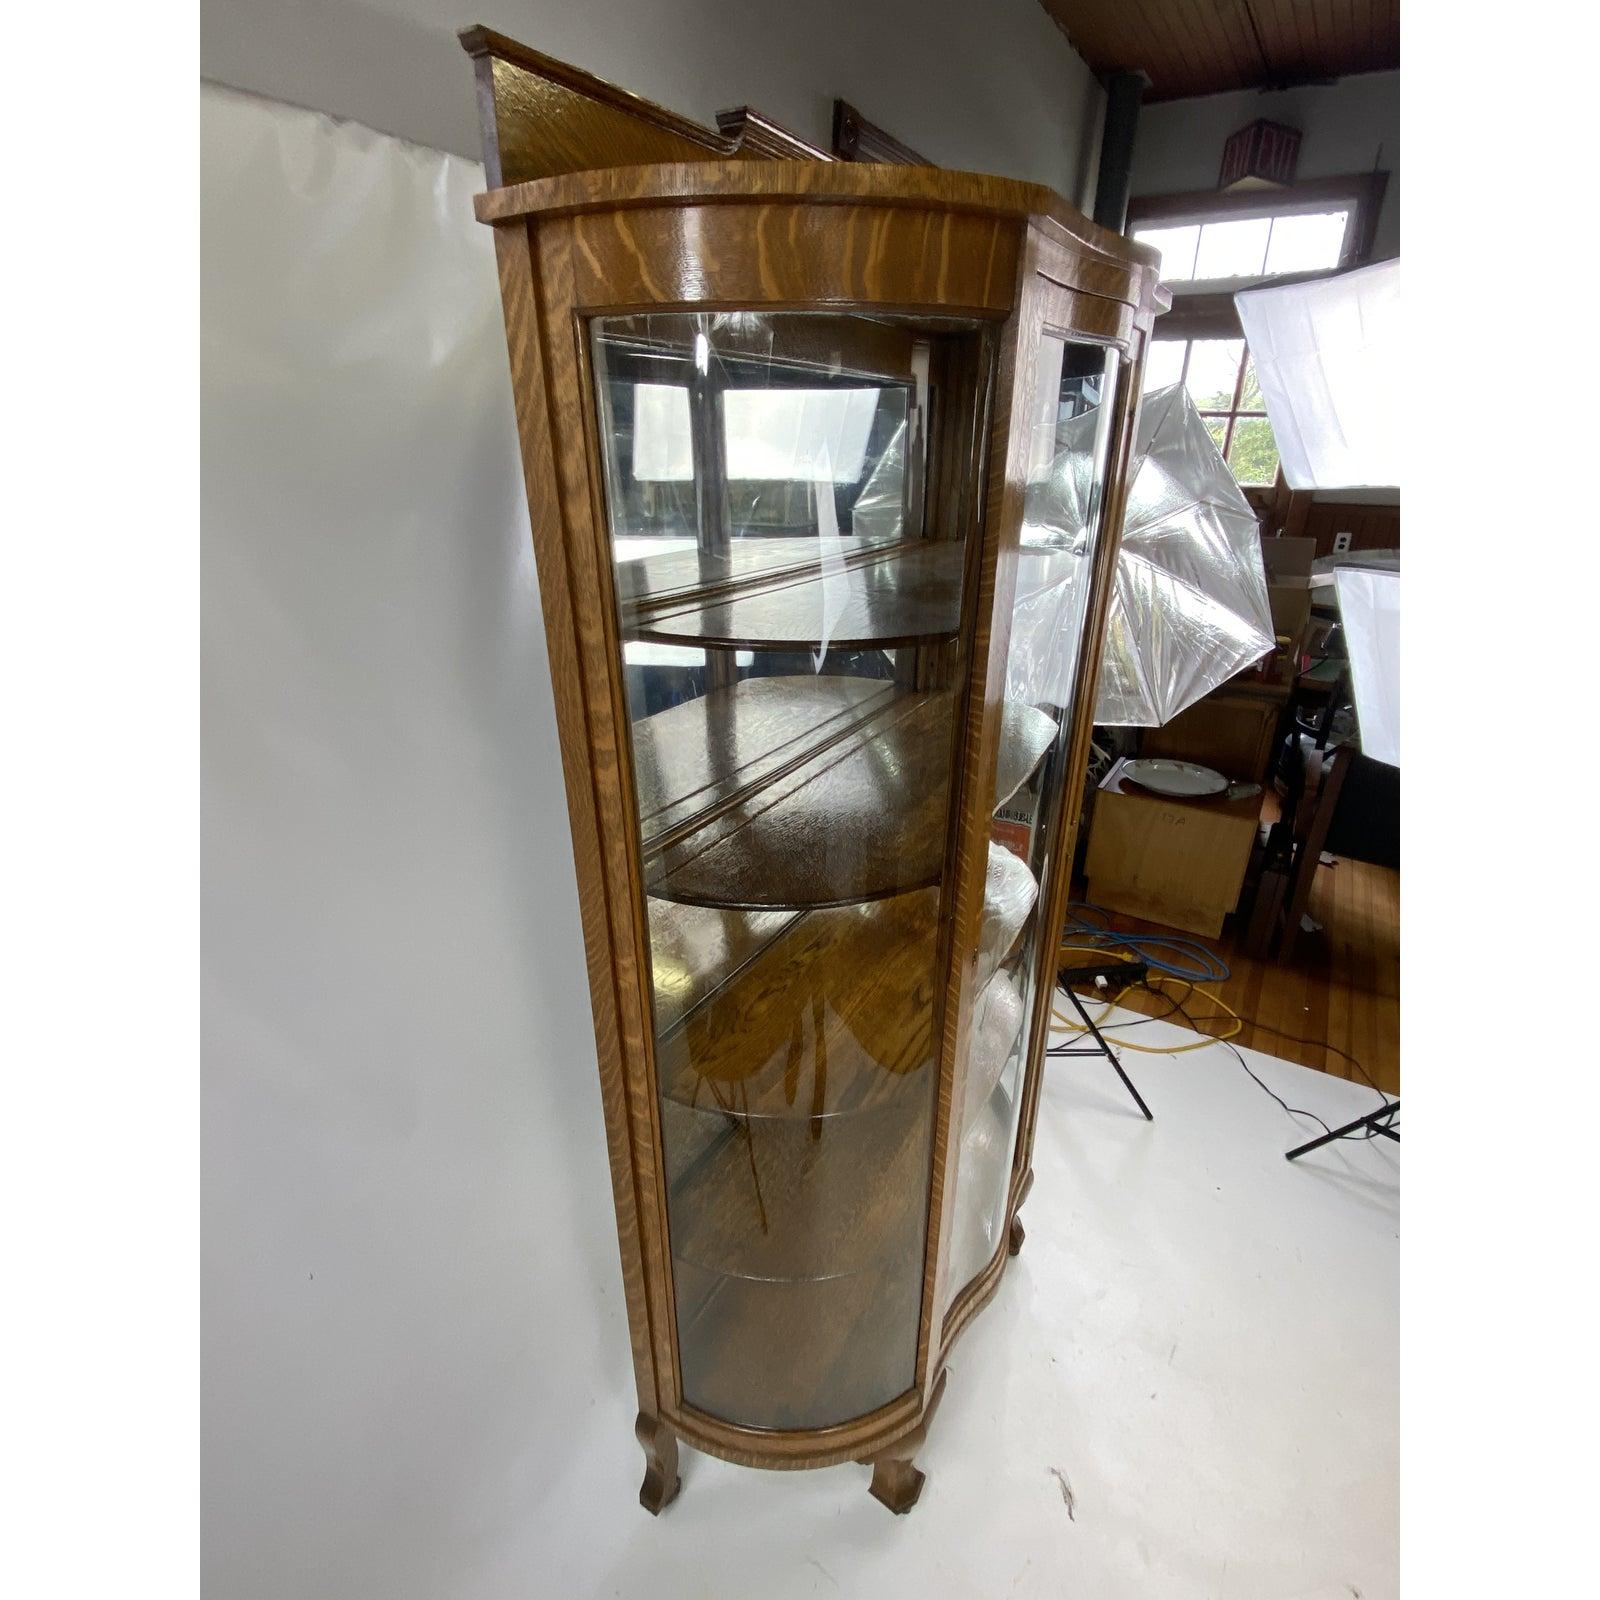 For sale is this very nice antique china cabinet. The cabinet has been restored in the past 15 years. Very well done. Very unique double bow curved front door.